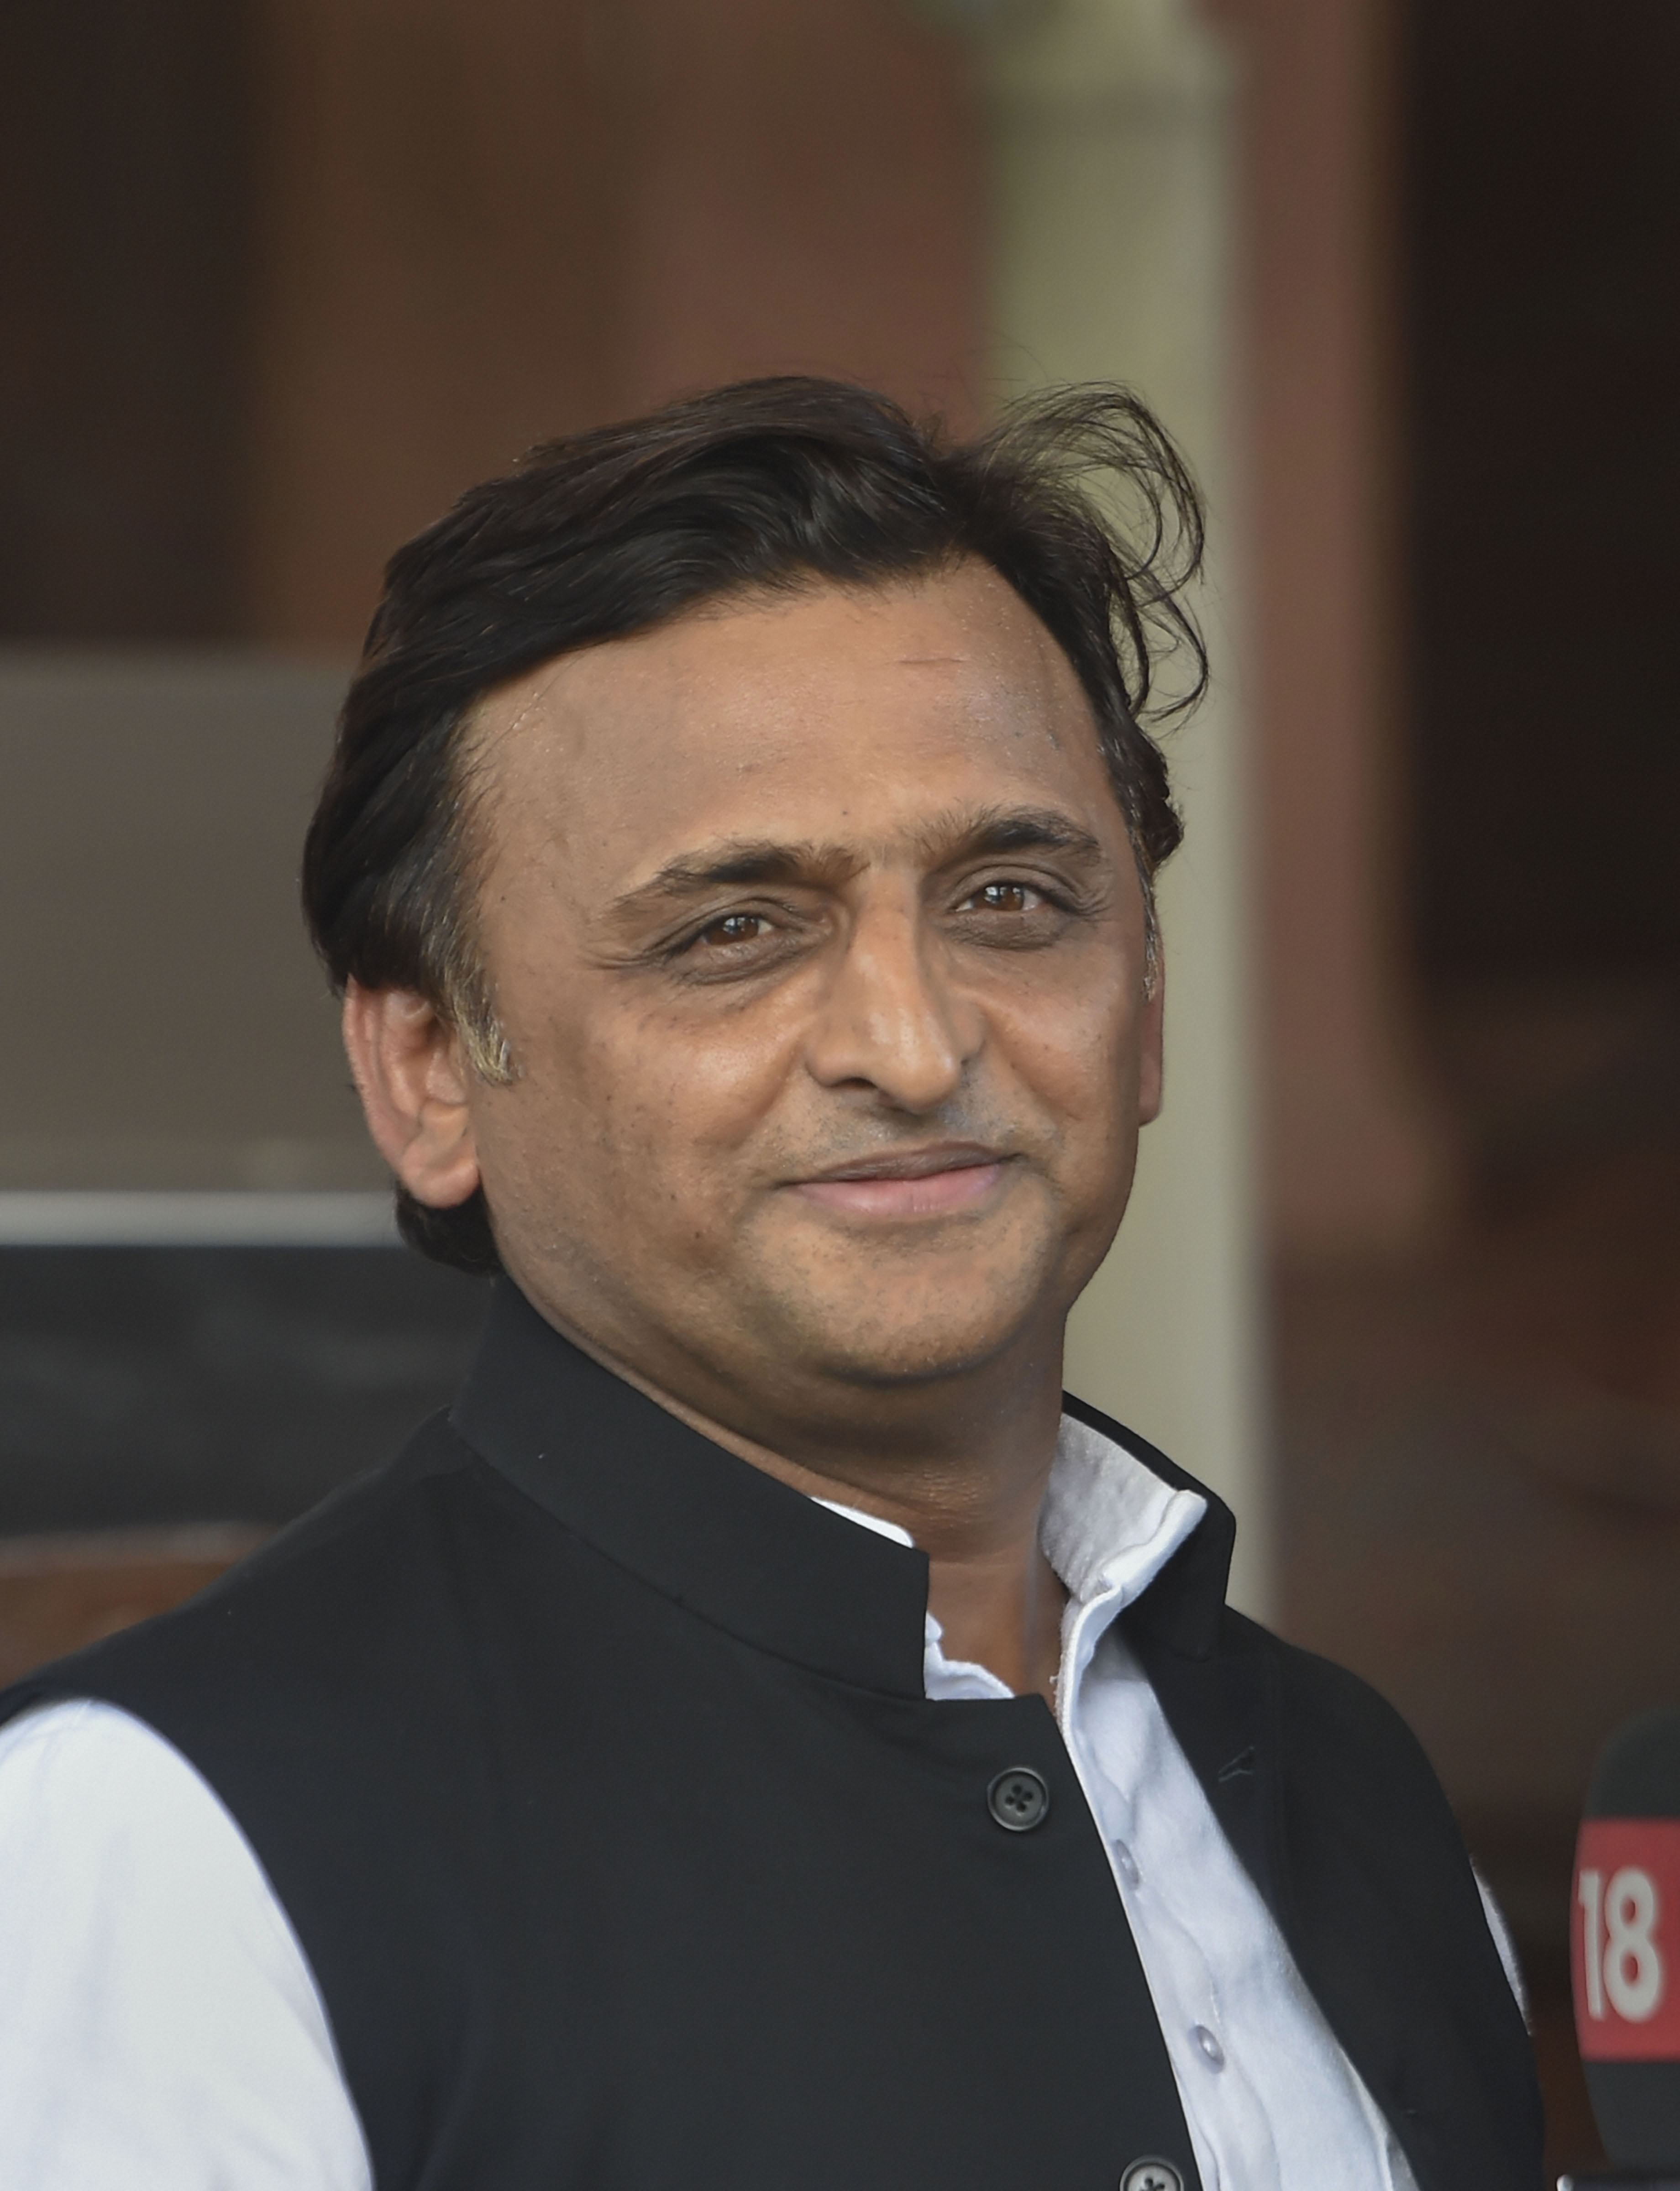 After free electricity, Akhilesh now promises laptops for students